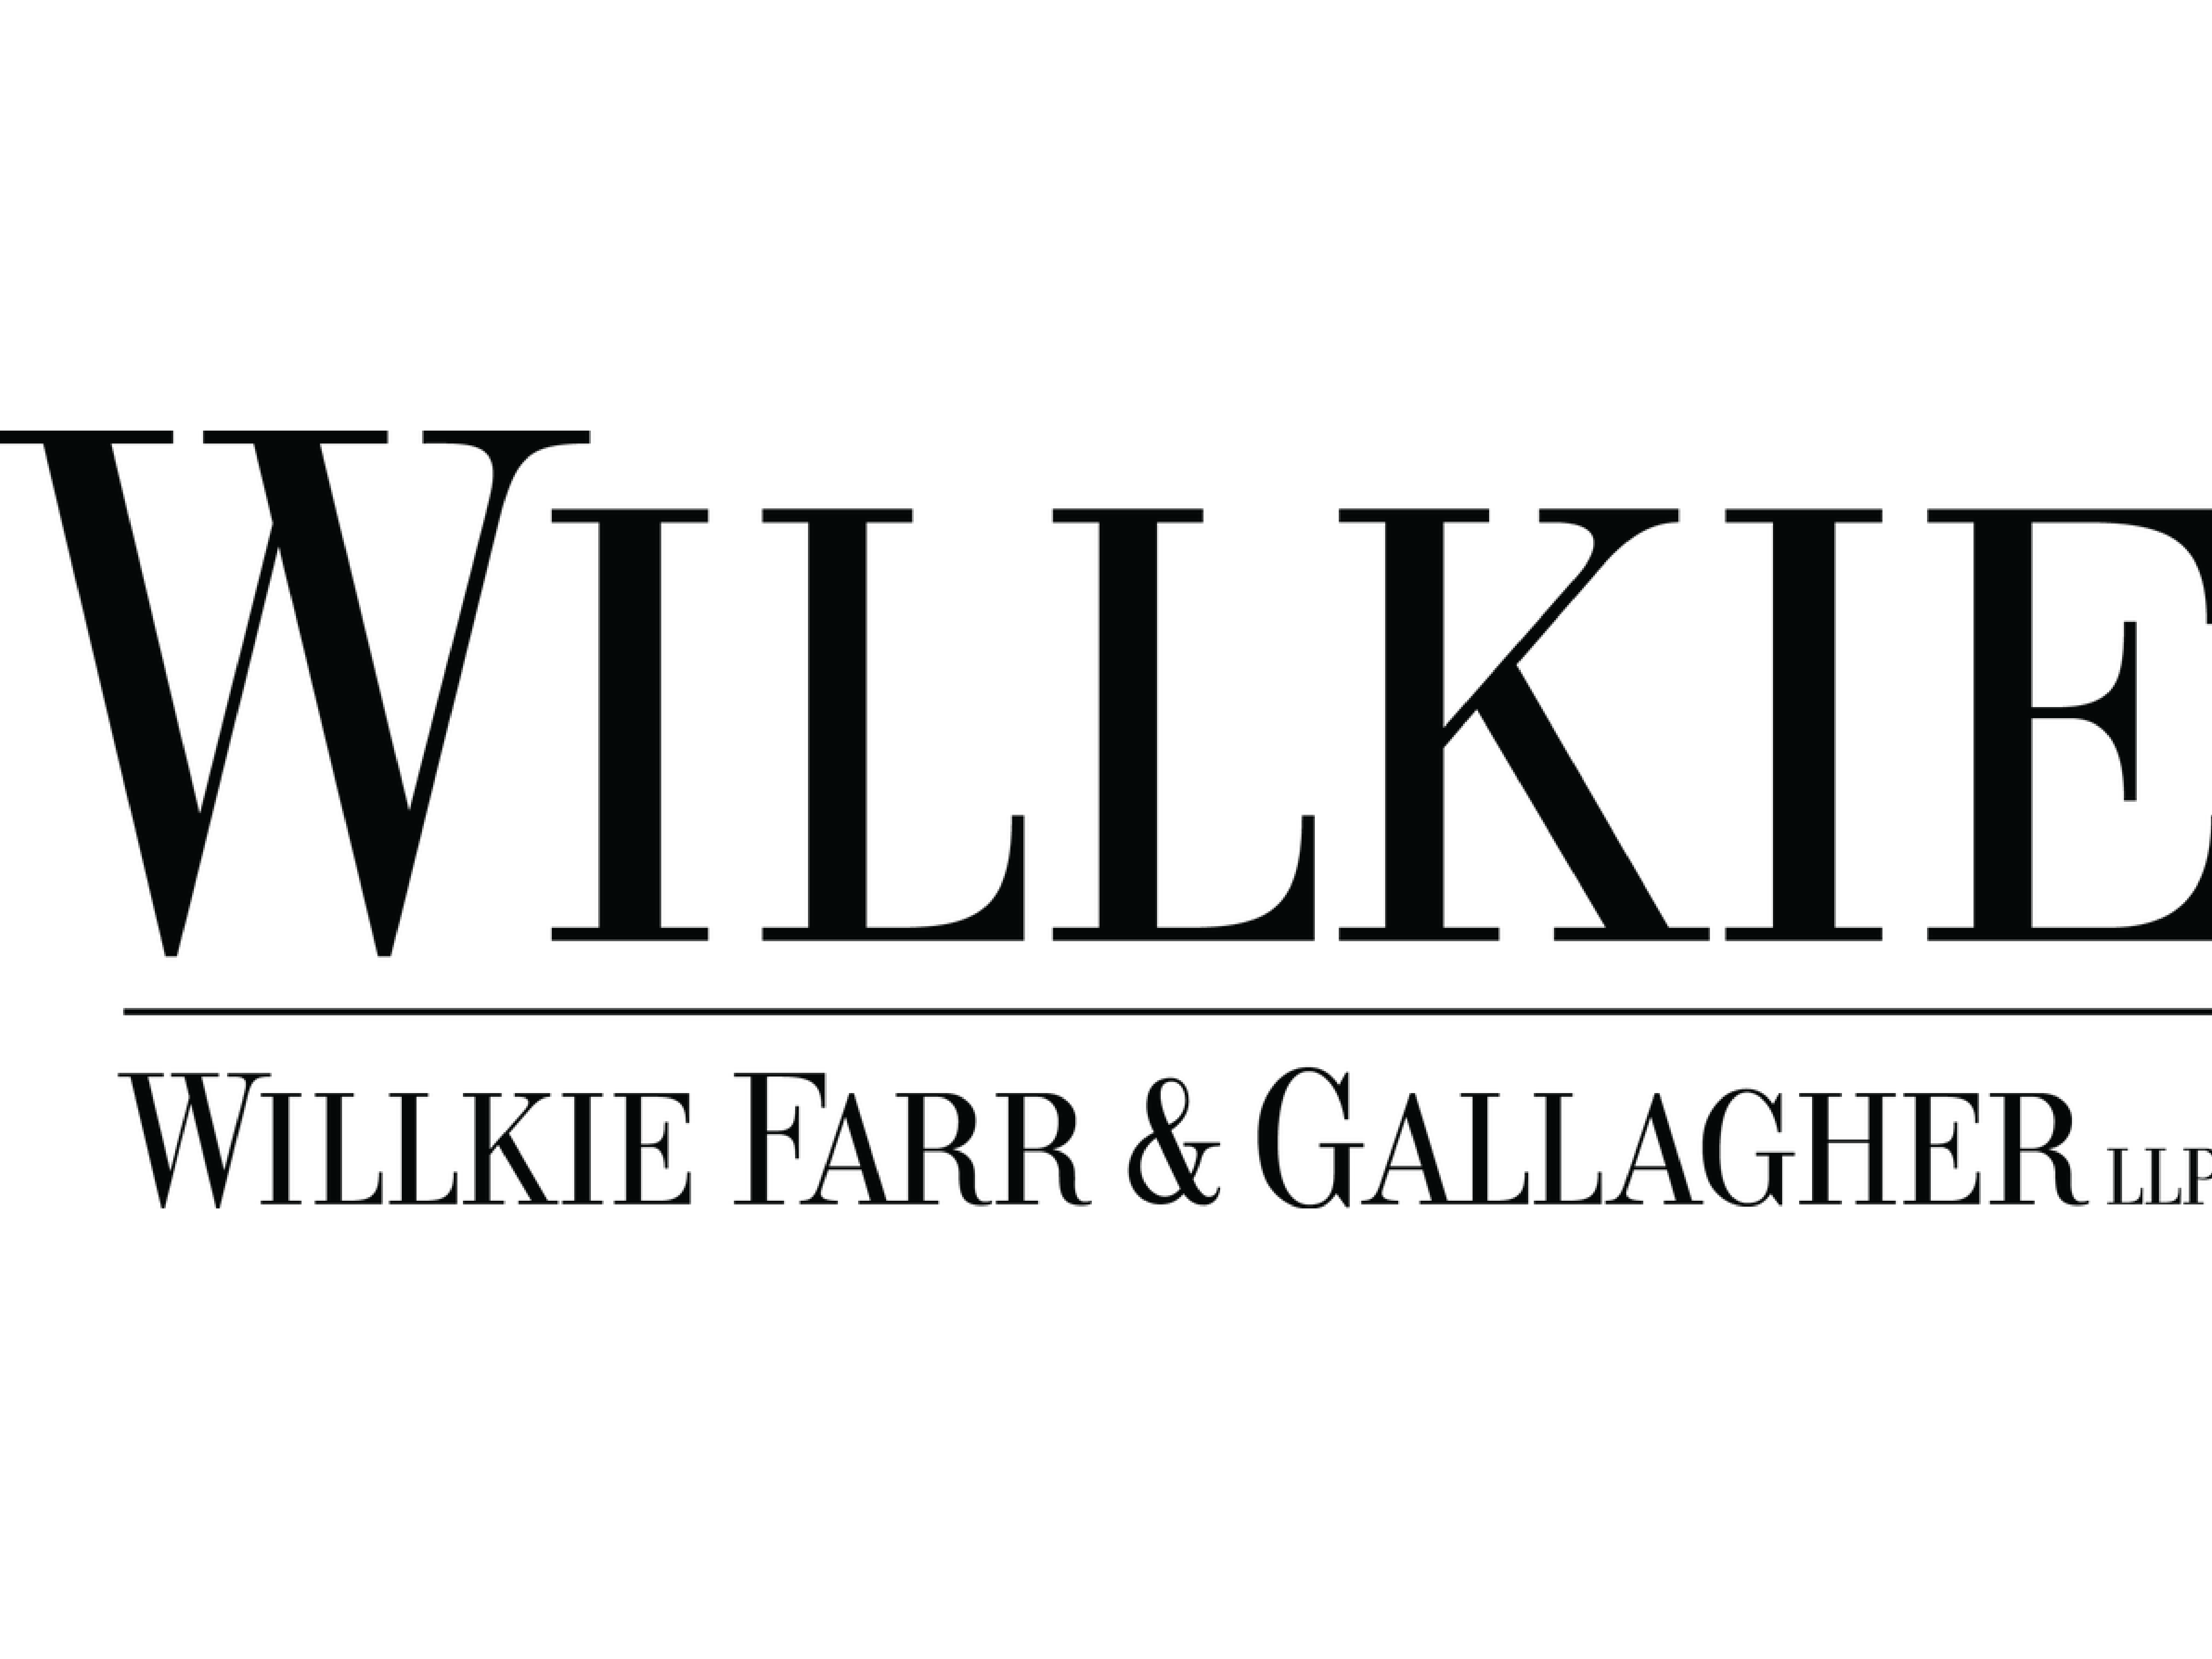 pitchly-client-logo-wilkie-farr-gallagher